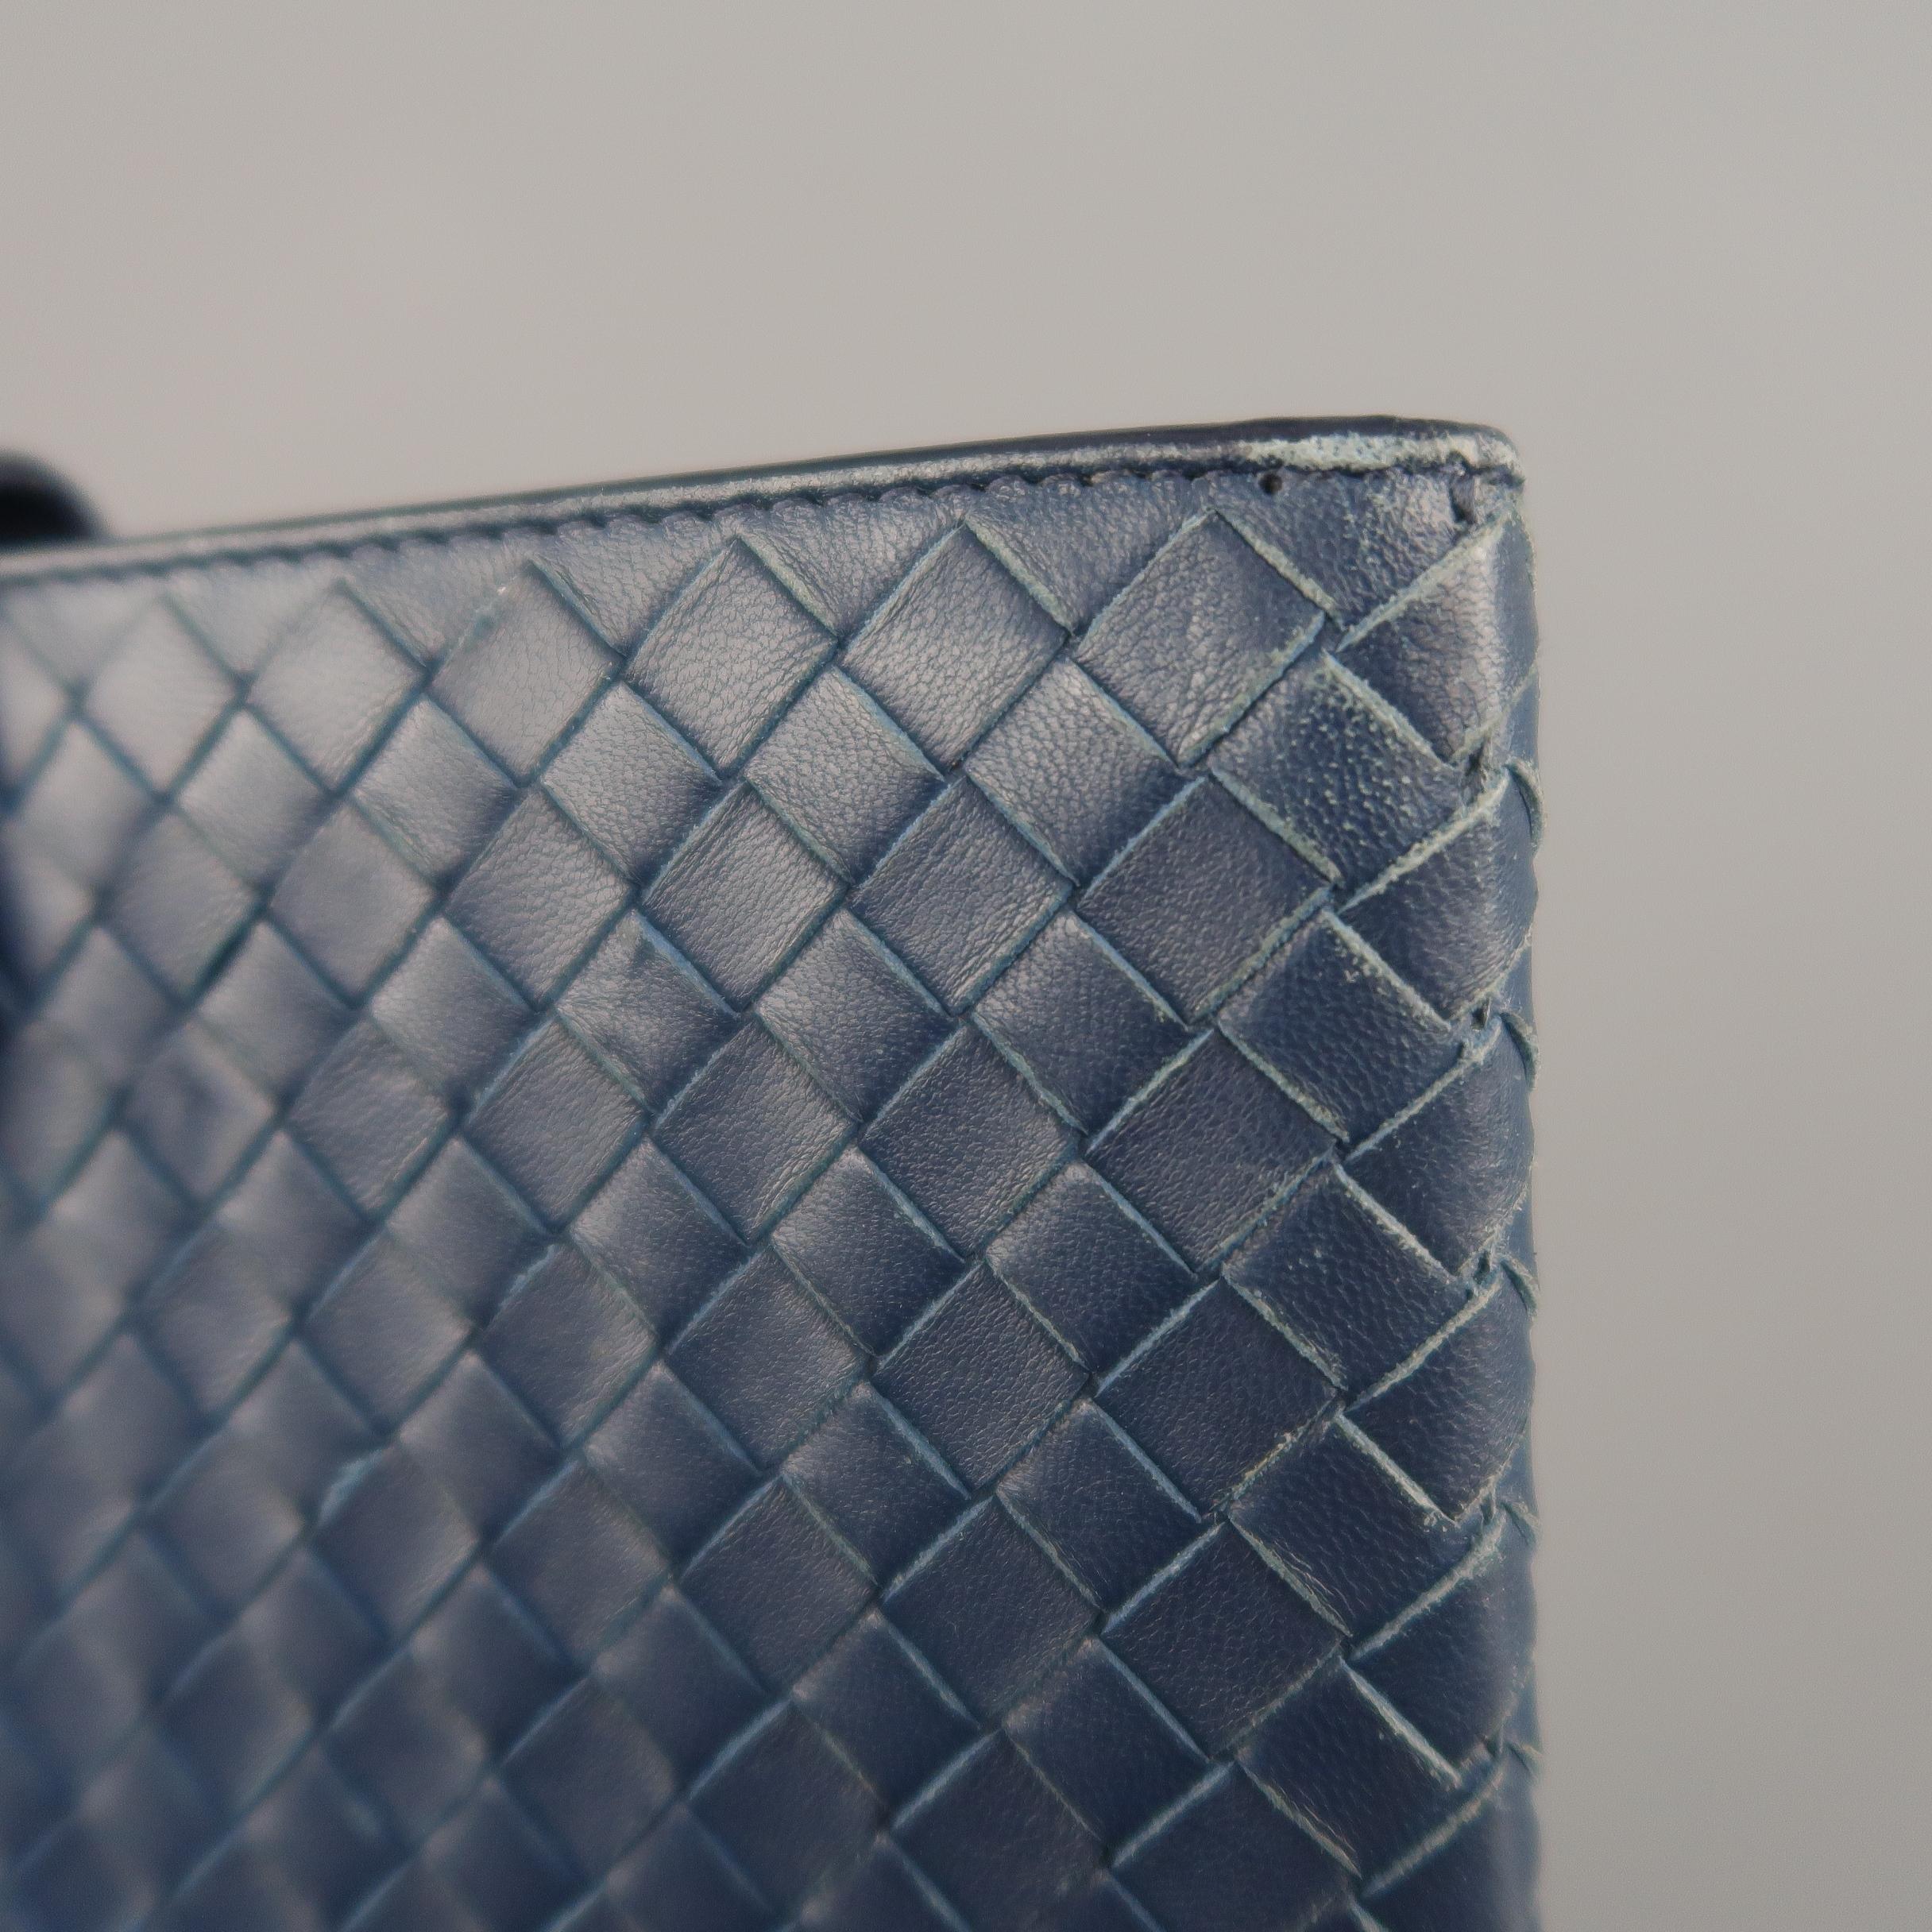 BOTTEGA VENETA tablet case comes in light navy blue woven Intrecciato leather with a snap tab top closure and taupe fabric interior. Made in Italy.
 
Good Pre-Owned Condition.
 
10.5 x 8 in.